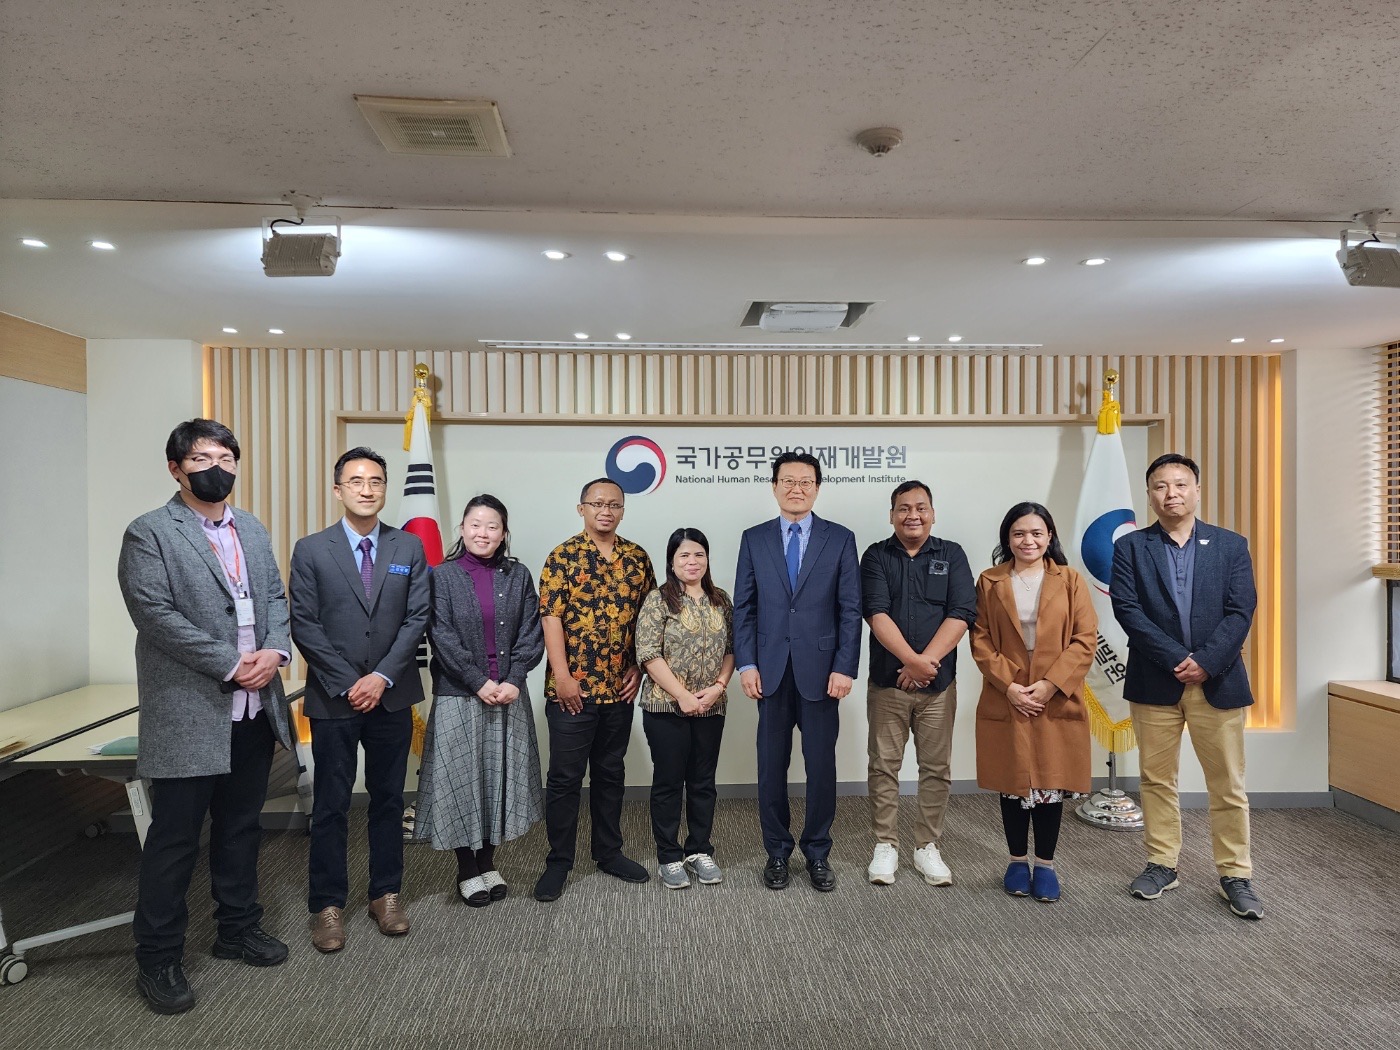 Indonesian Delegation from the Ministry of Education, Culture, Research and Technology Visited the NHI Global Leadership Campus for a Constructive Working-Level Dialogue to Pave the Way for Future-Oriented Korea – Indonesia Intellectual Partnership and Collaboration